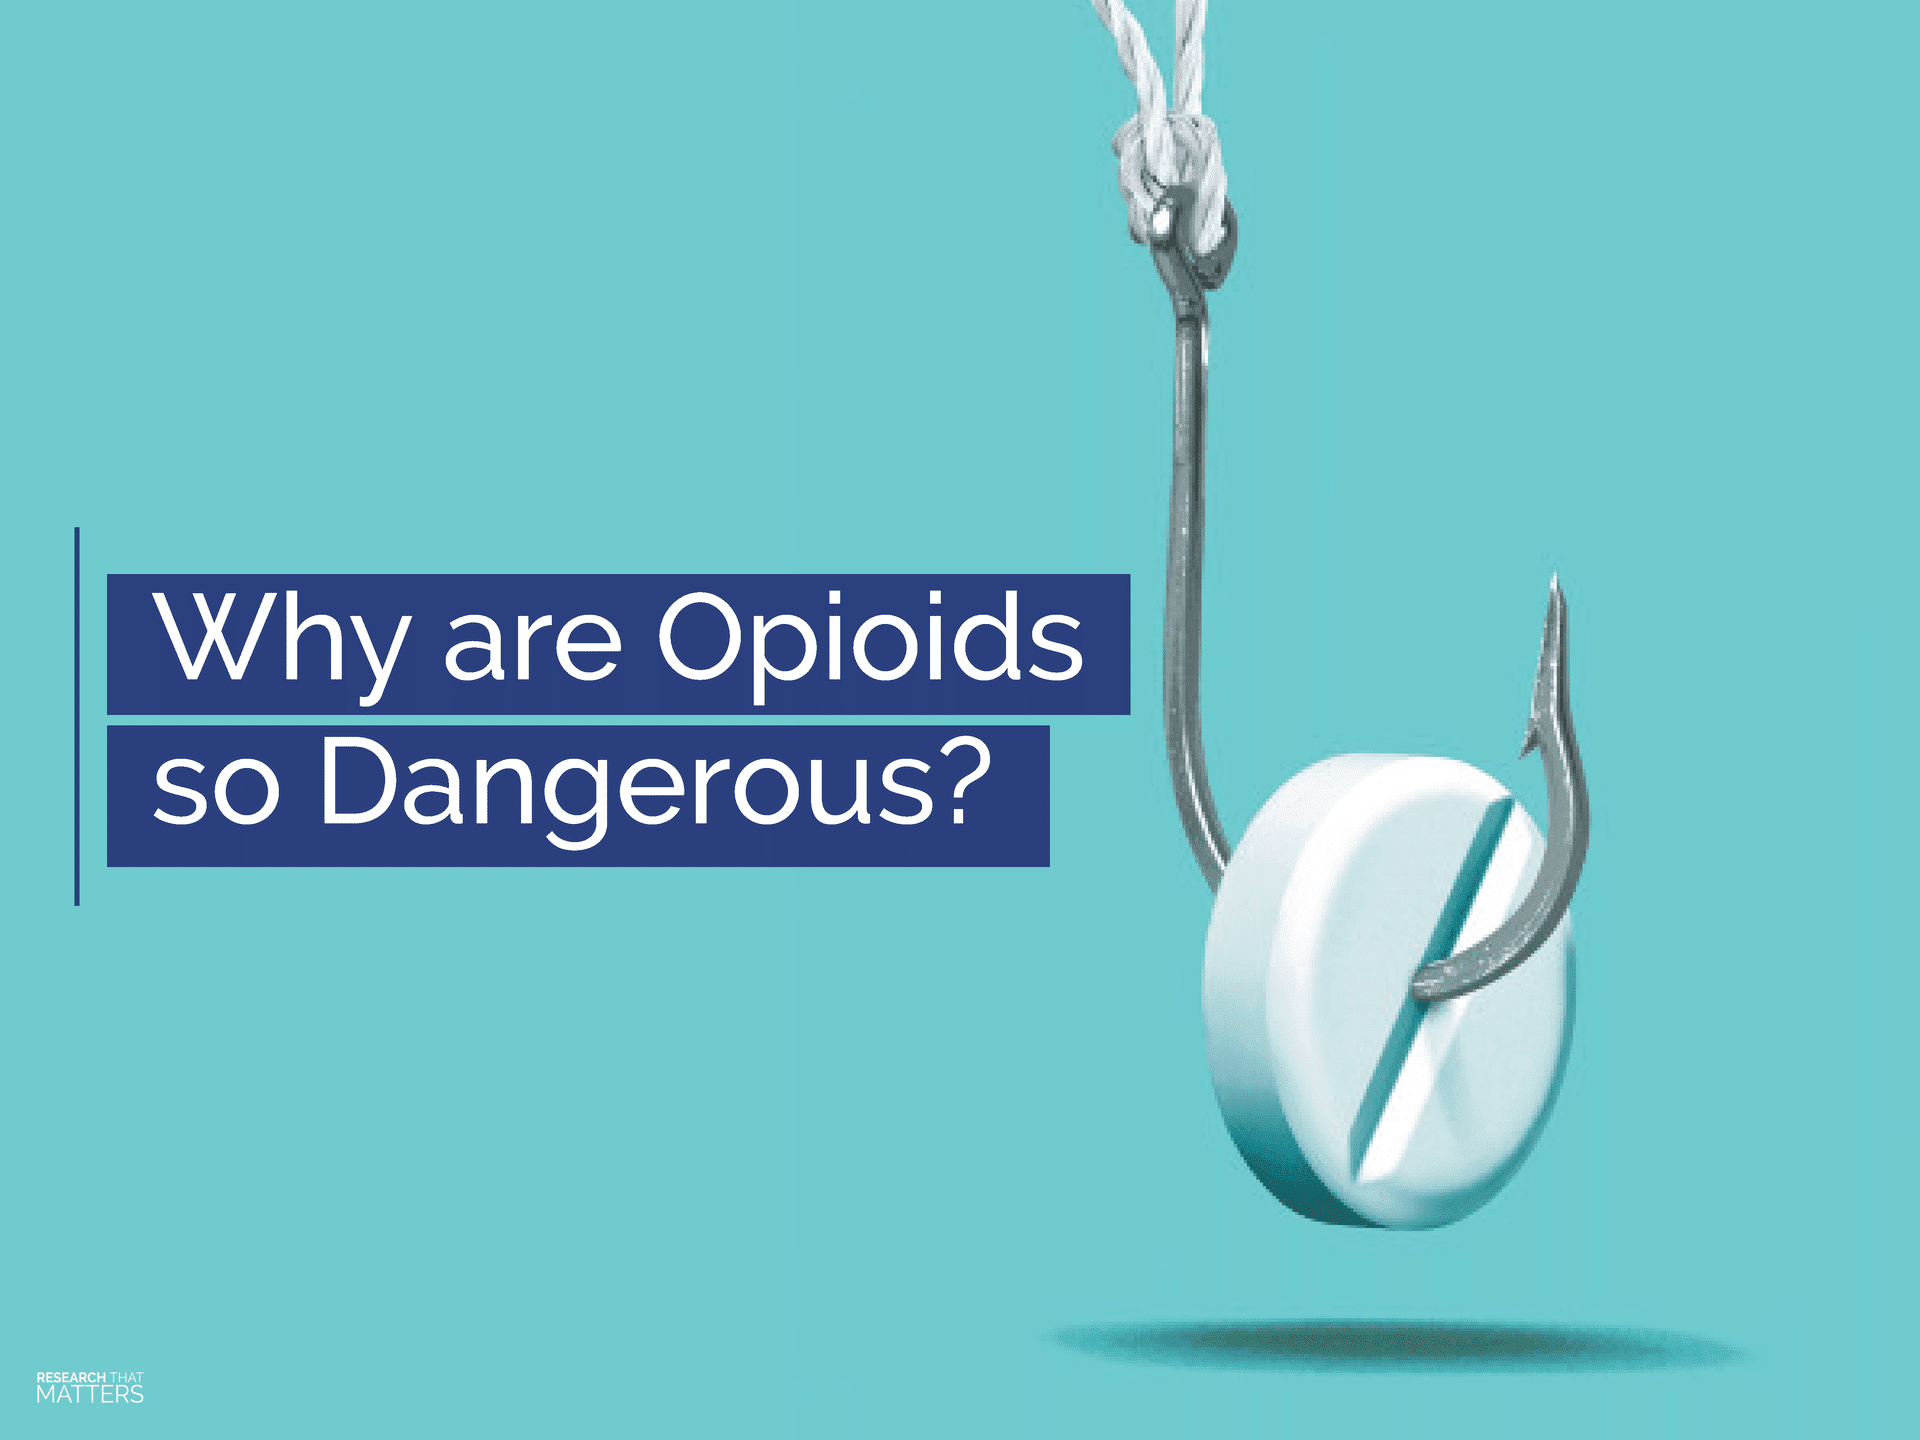 Why are Opioids so Dangerous?